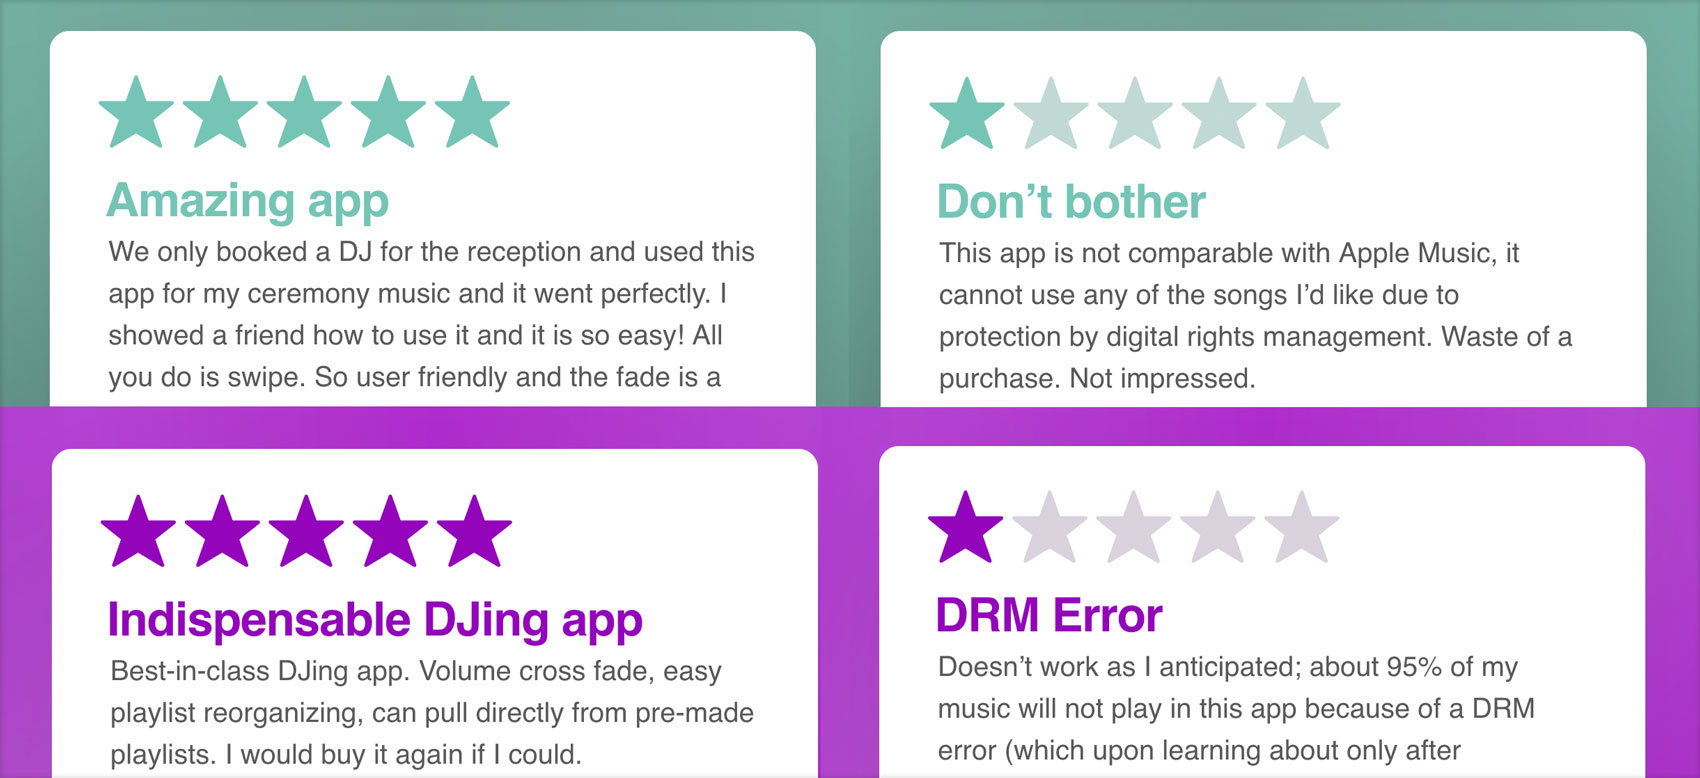 Party Monster reviews showing great reviews raving about the app alongside poor reviews mentioning DRM